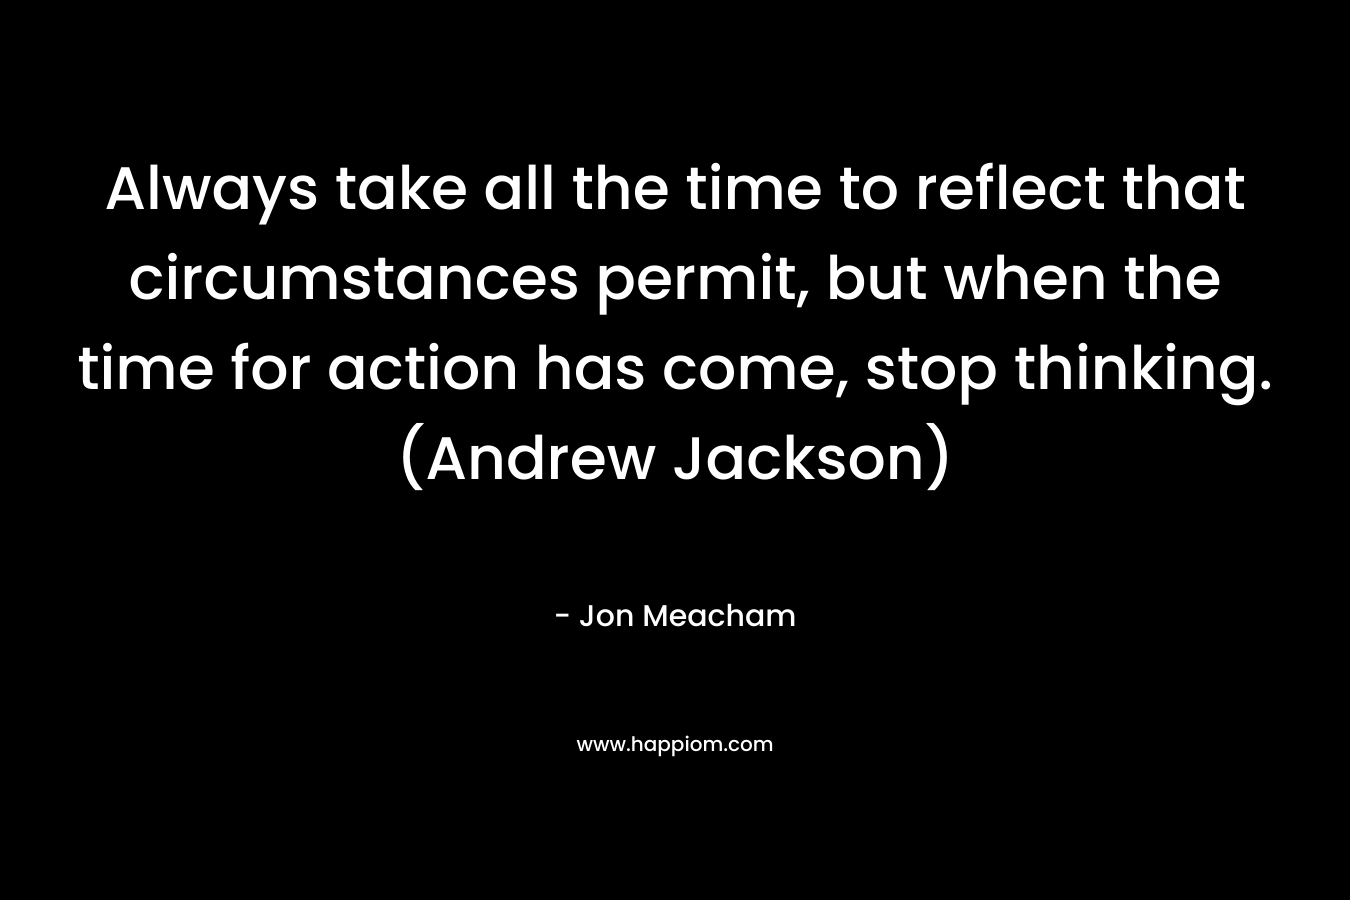 Always take all the time to reflect that circumstances permit, but when the time for action has come, stop thinking. (Andrew Jackson) – Jon Meacham